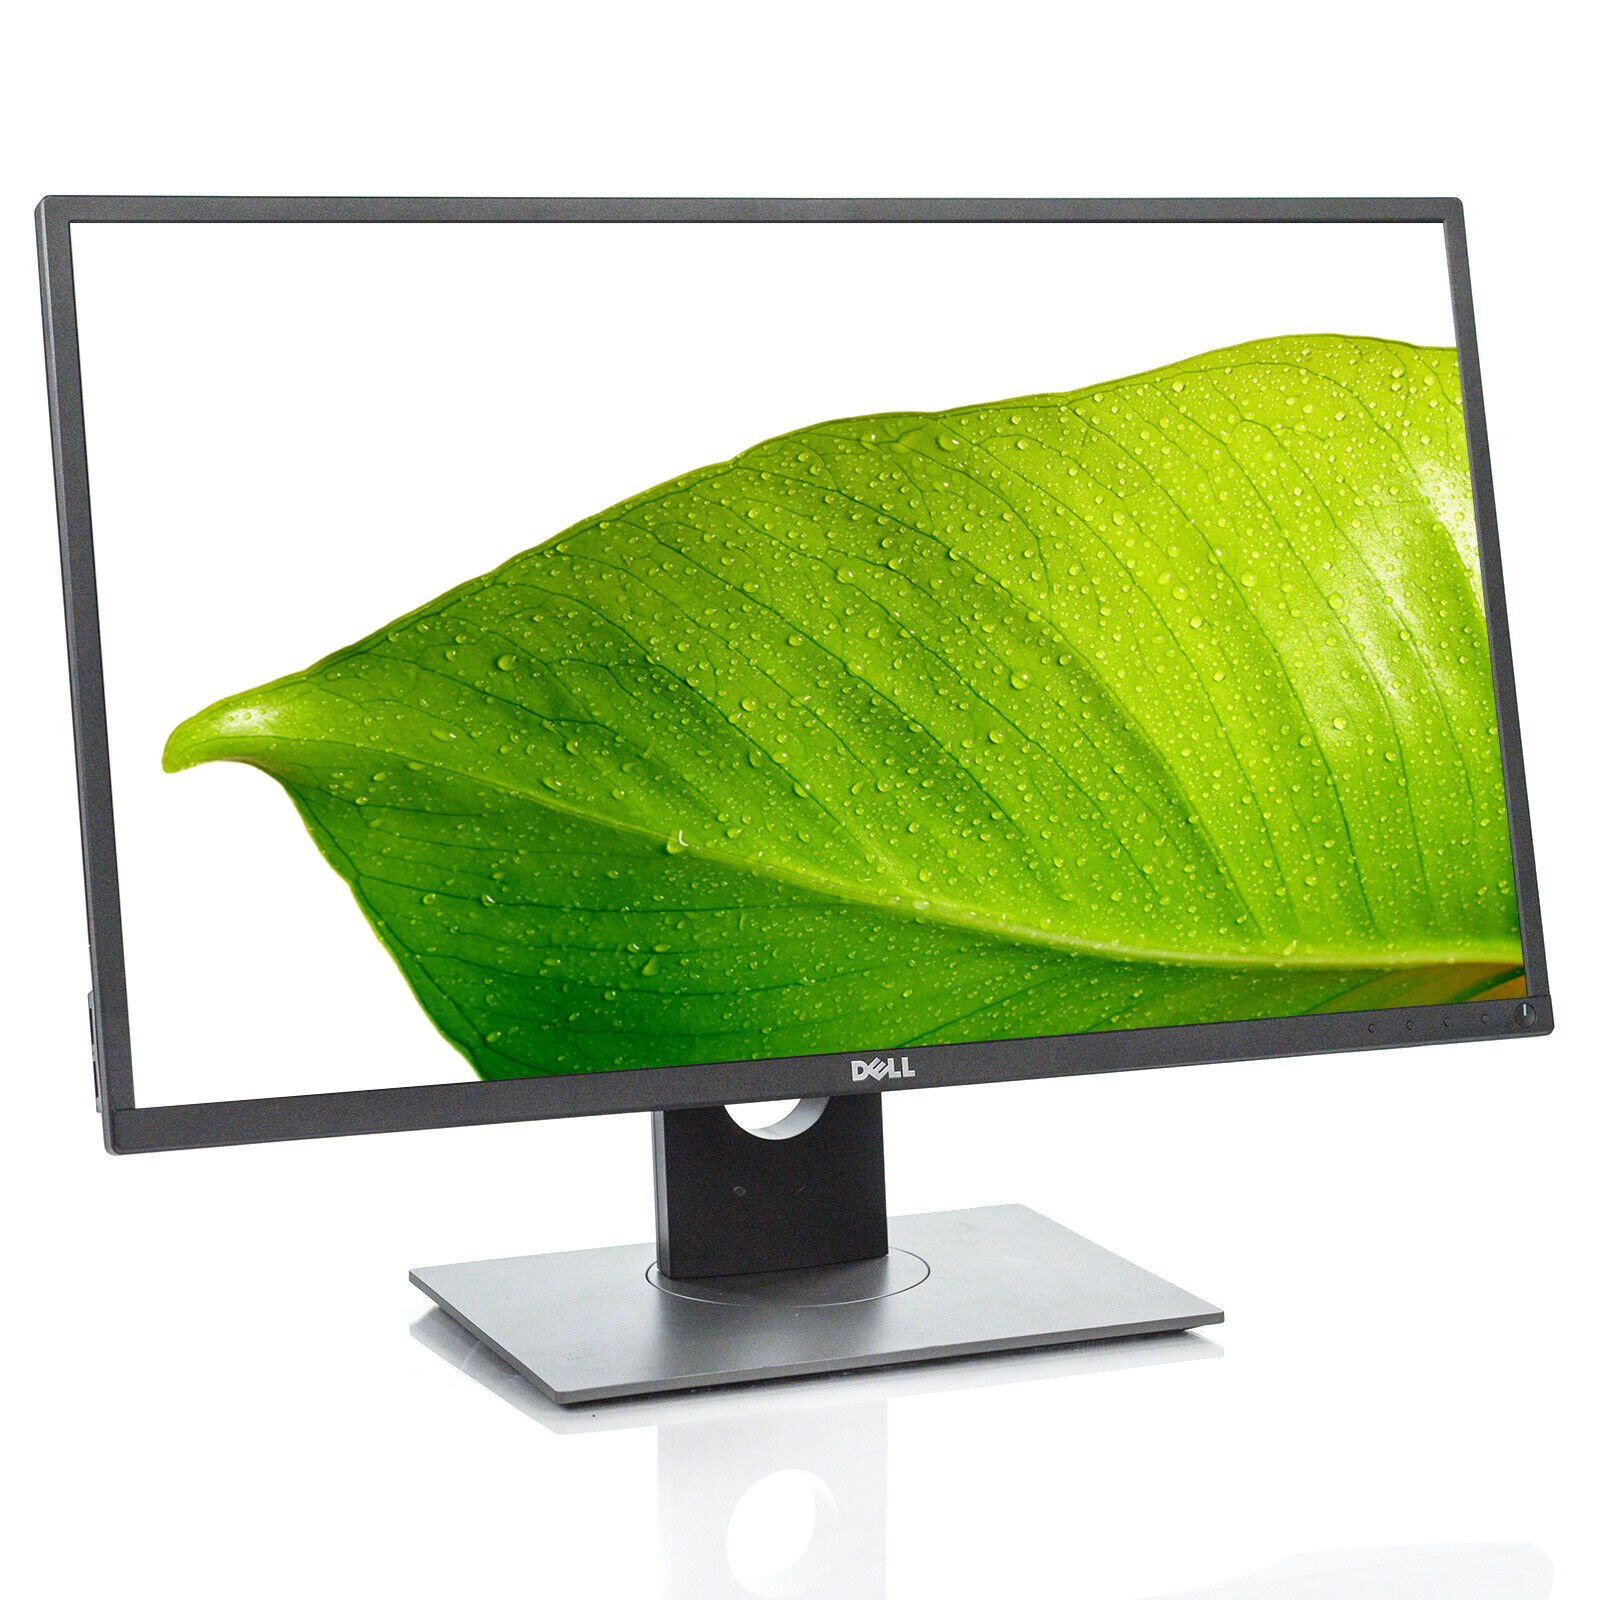 Dell P2717H 27 Full HD 1920x1080 16:9 LED Backlit Widescreen Monitor - Grade A. Available Now for $129.99